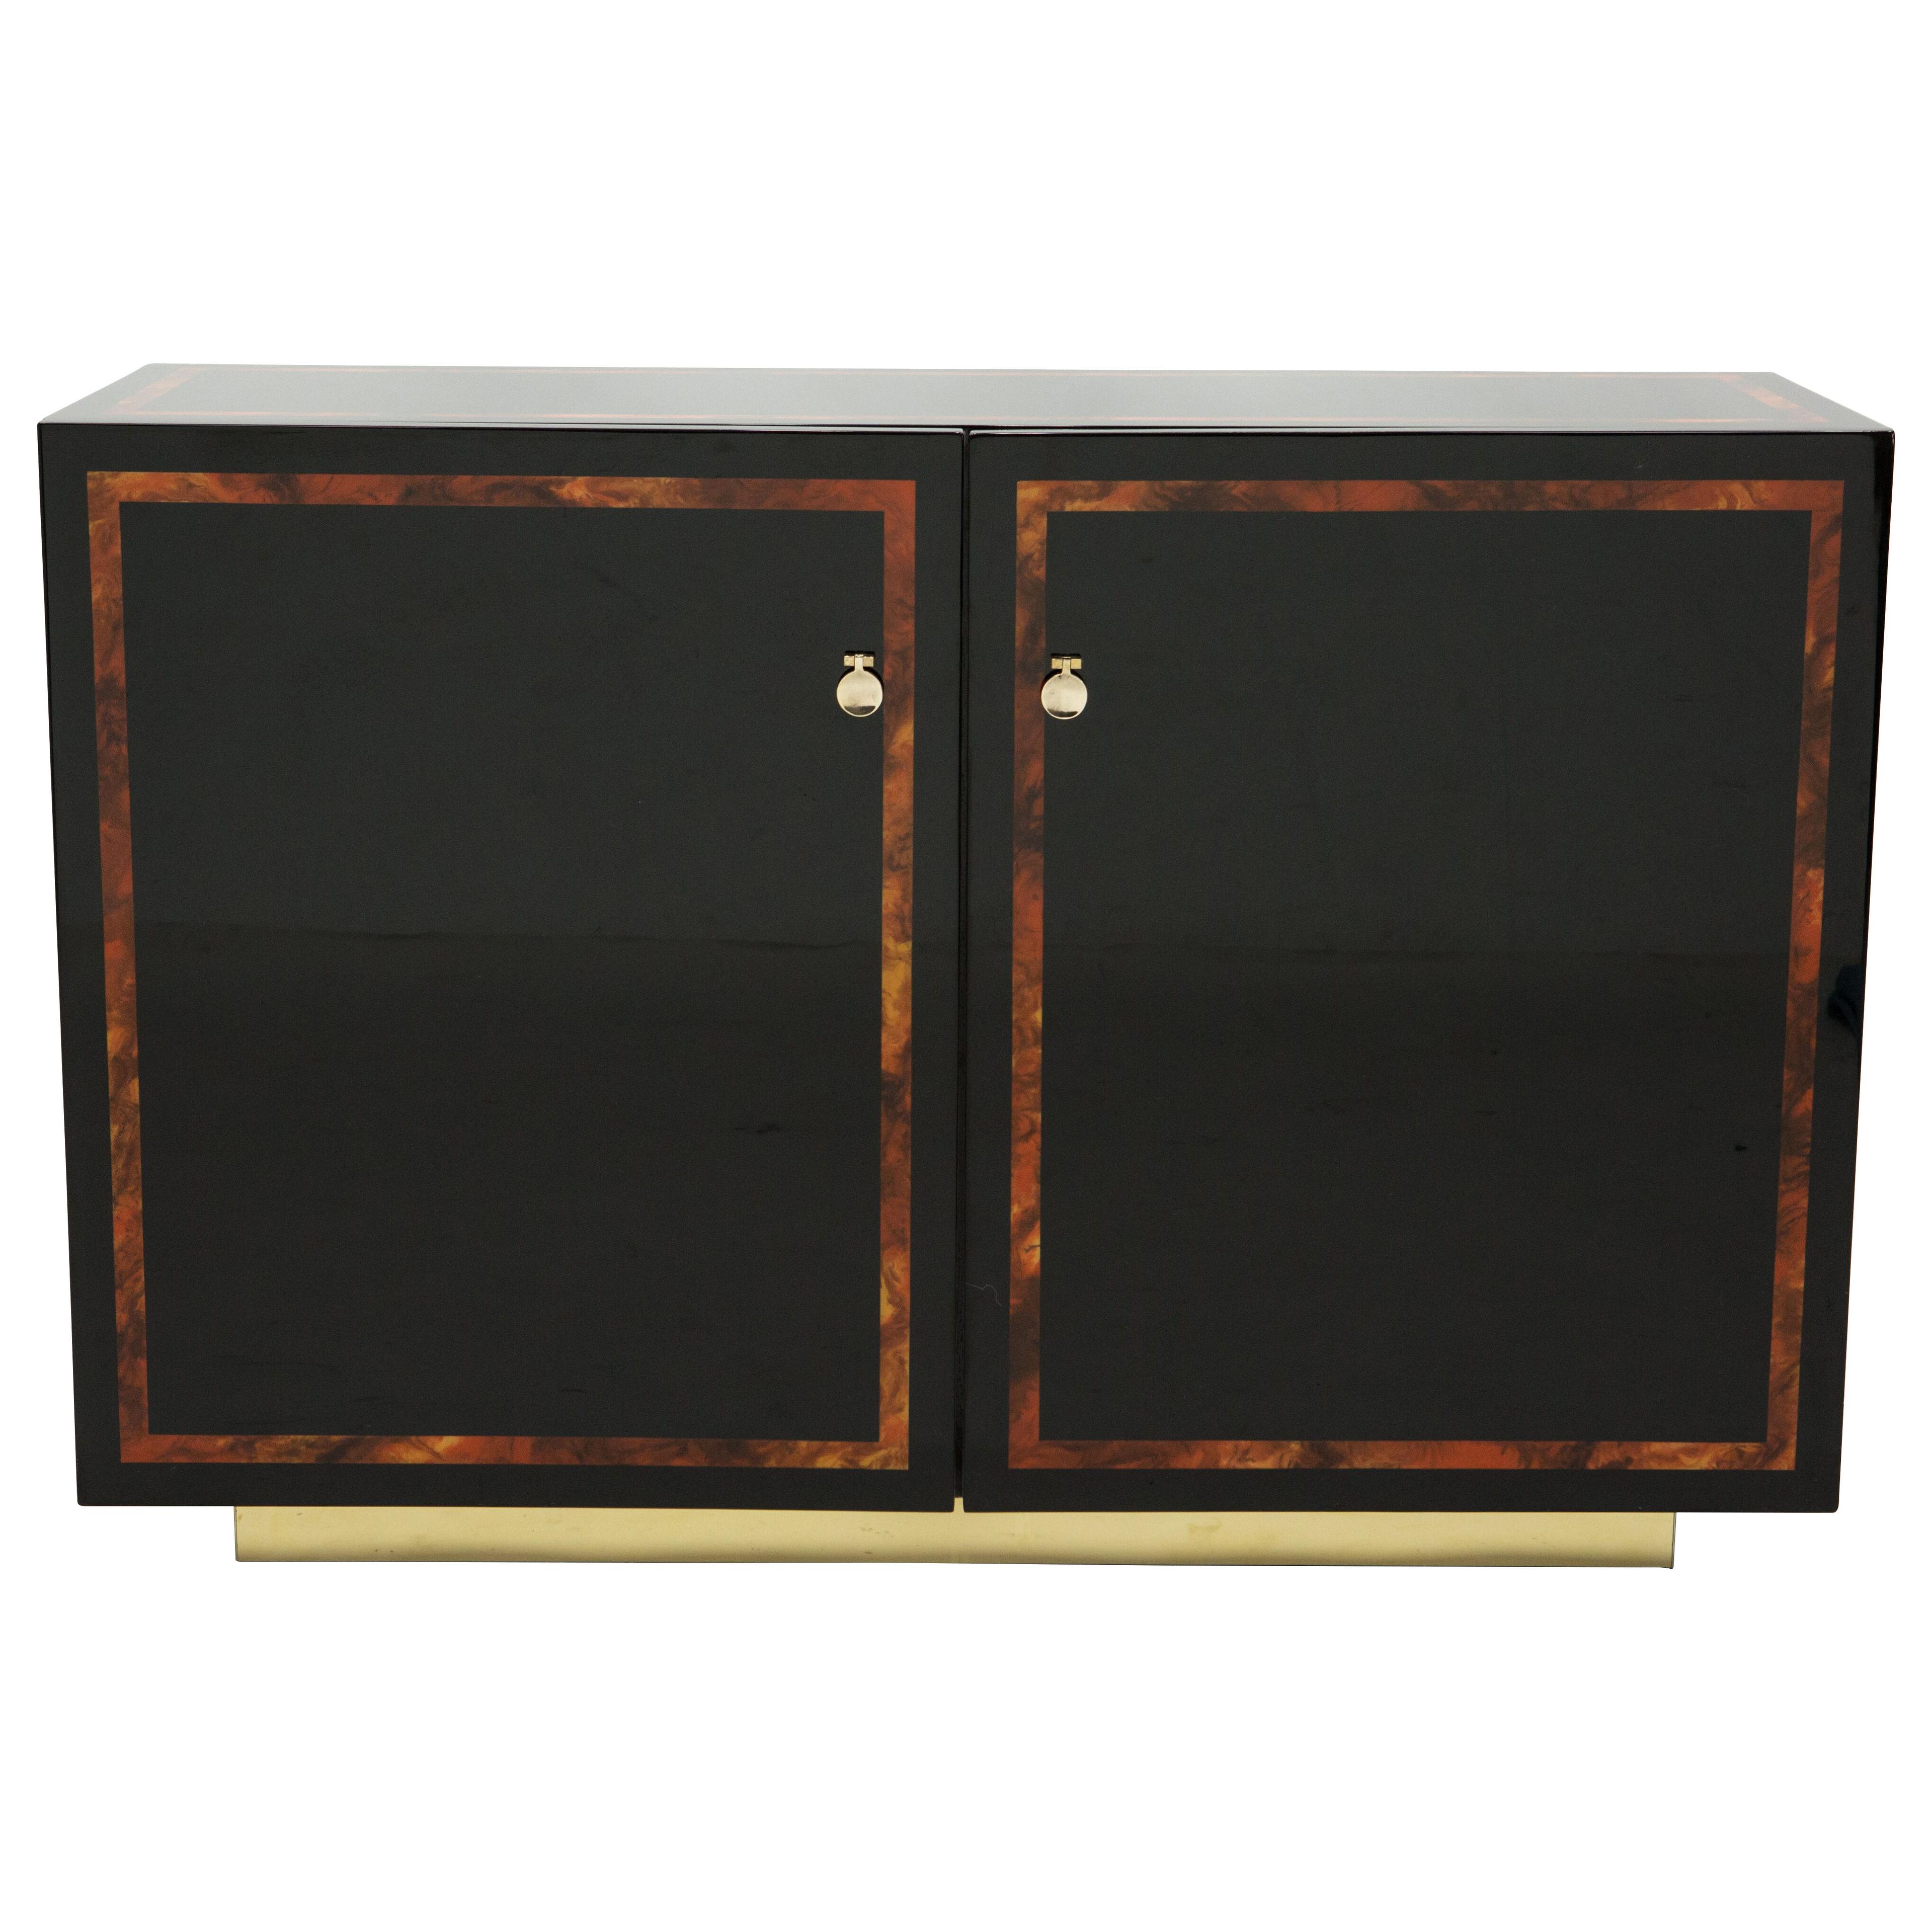 Black Lacquer Burl Wood Brass Cabinet Sideboard by J.C. Mahey, 1970s